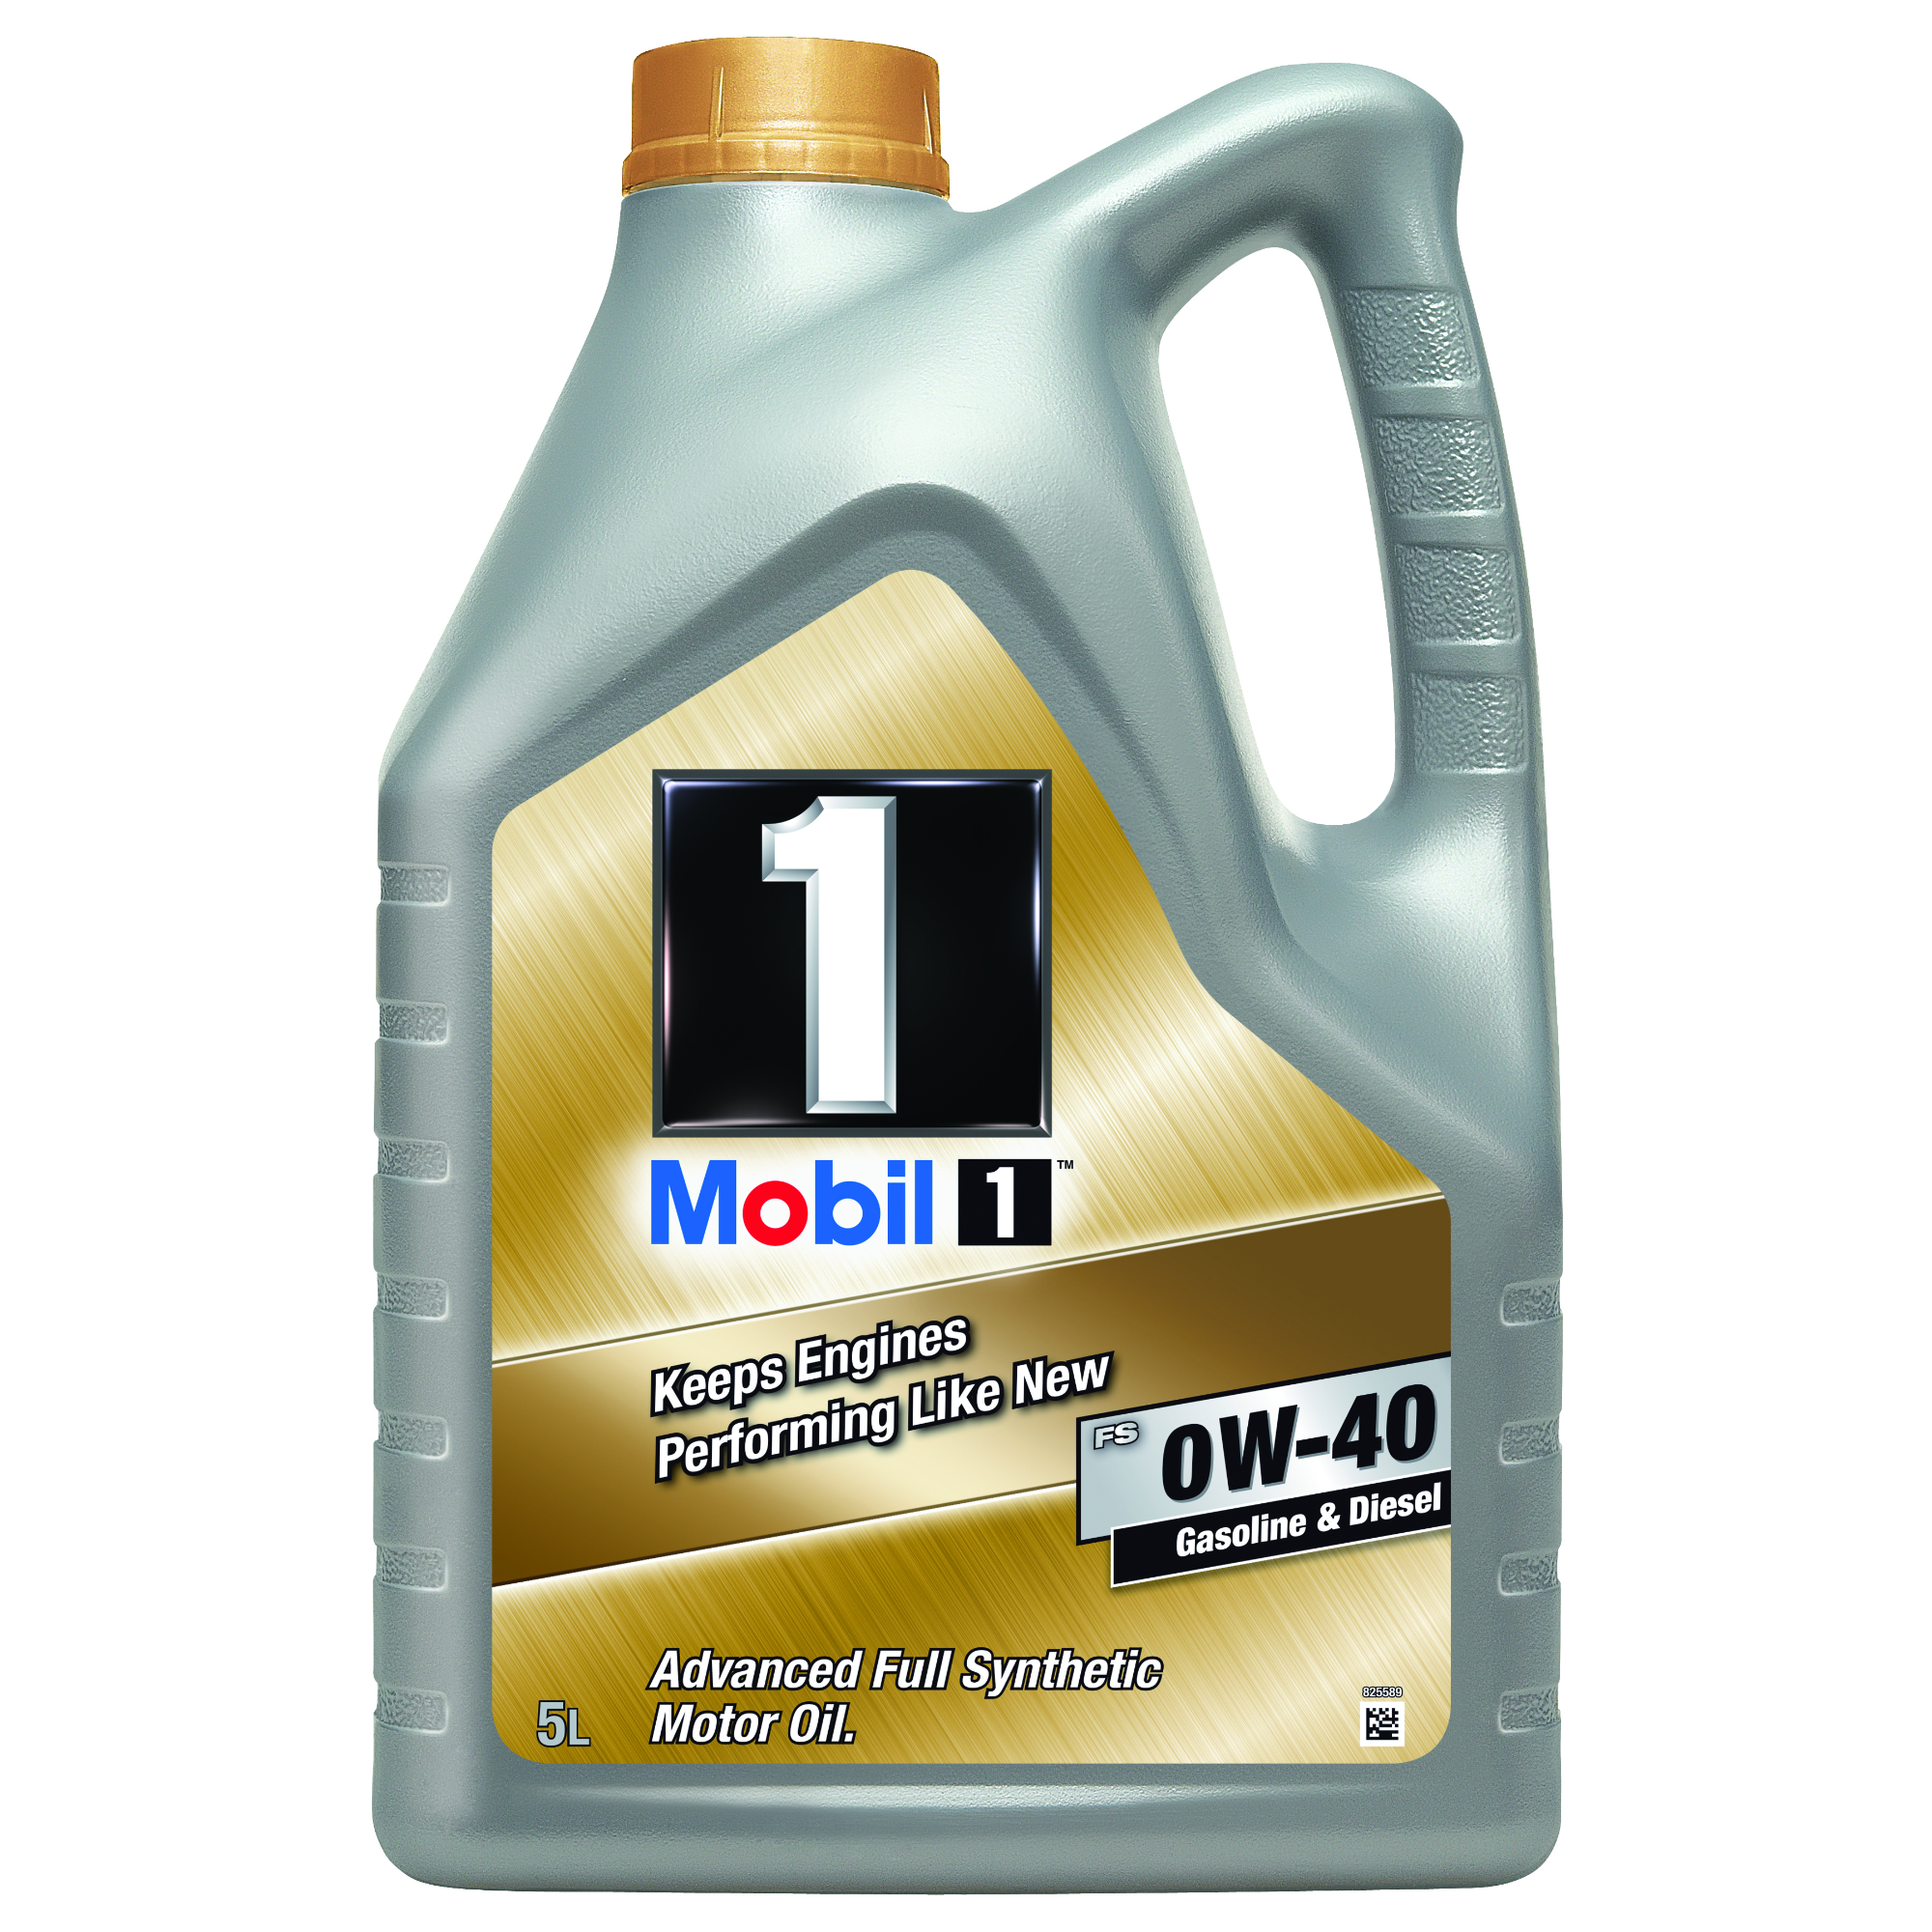 Mobil 1 FS 0W40 5L Engine Oil Fully Synthetic